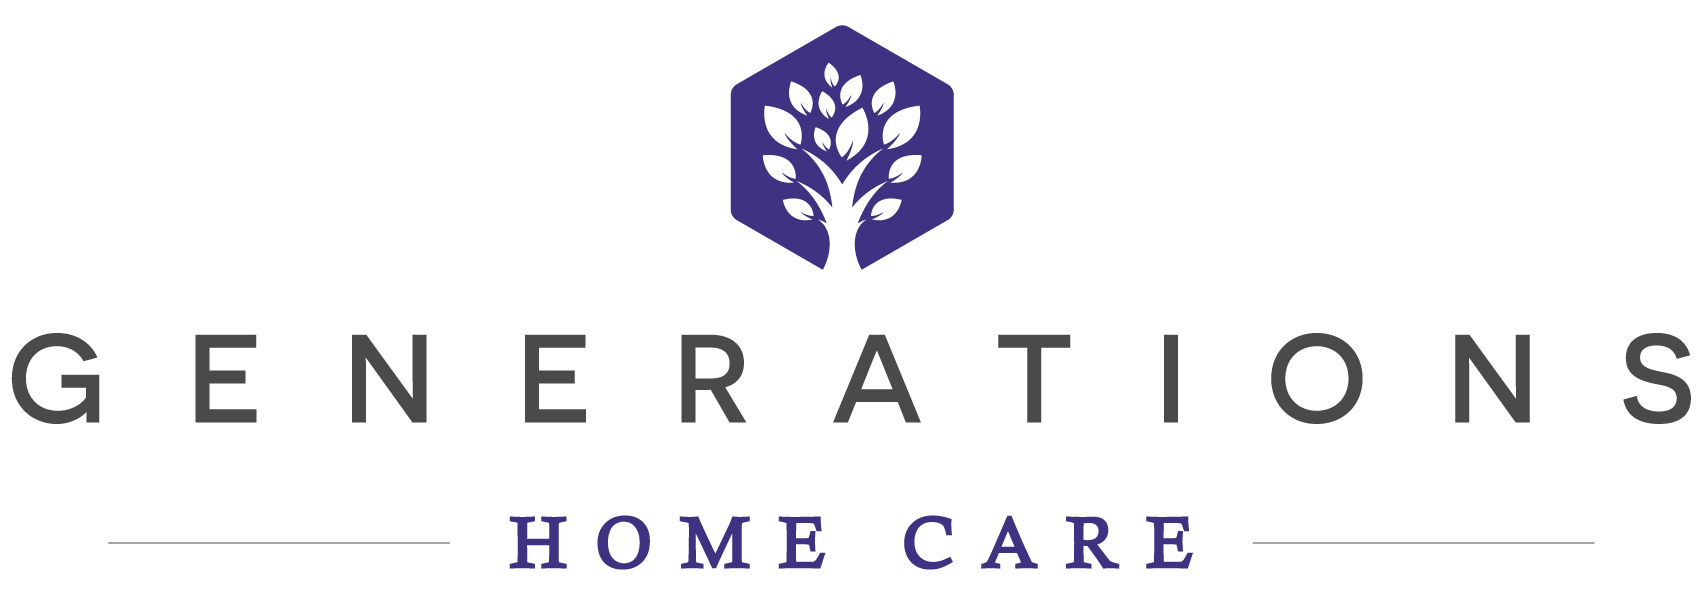 Generations Home Care   